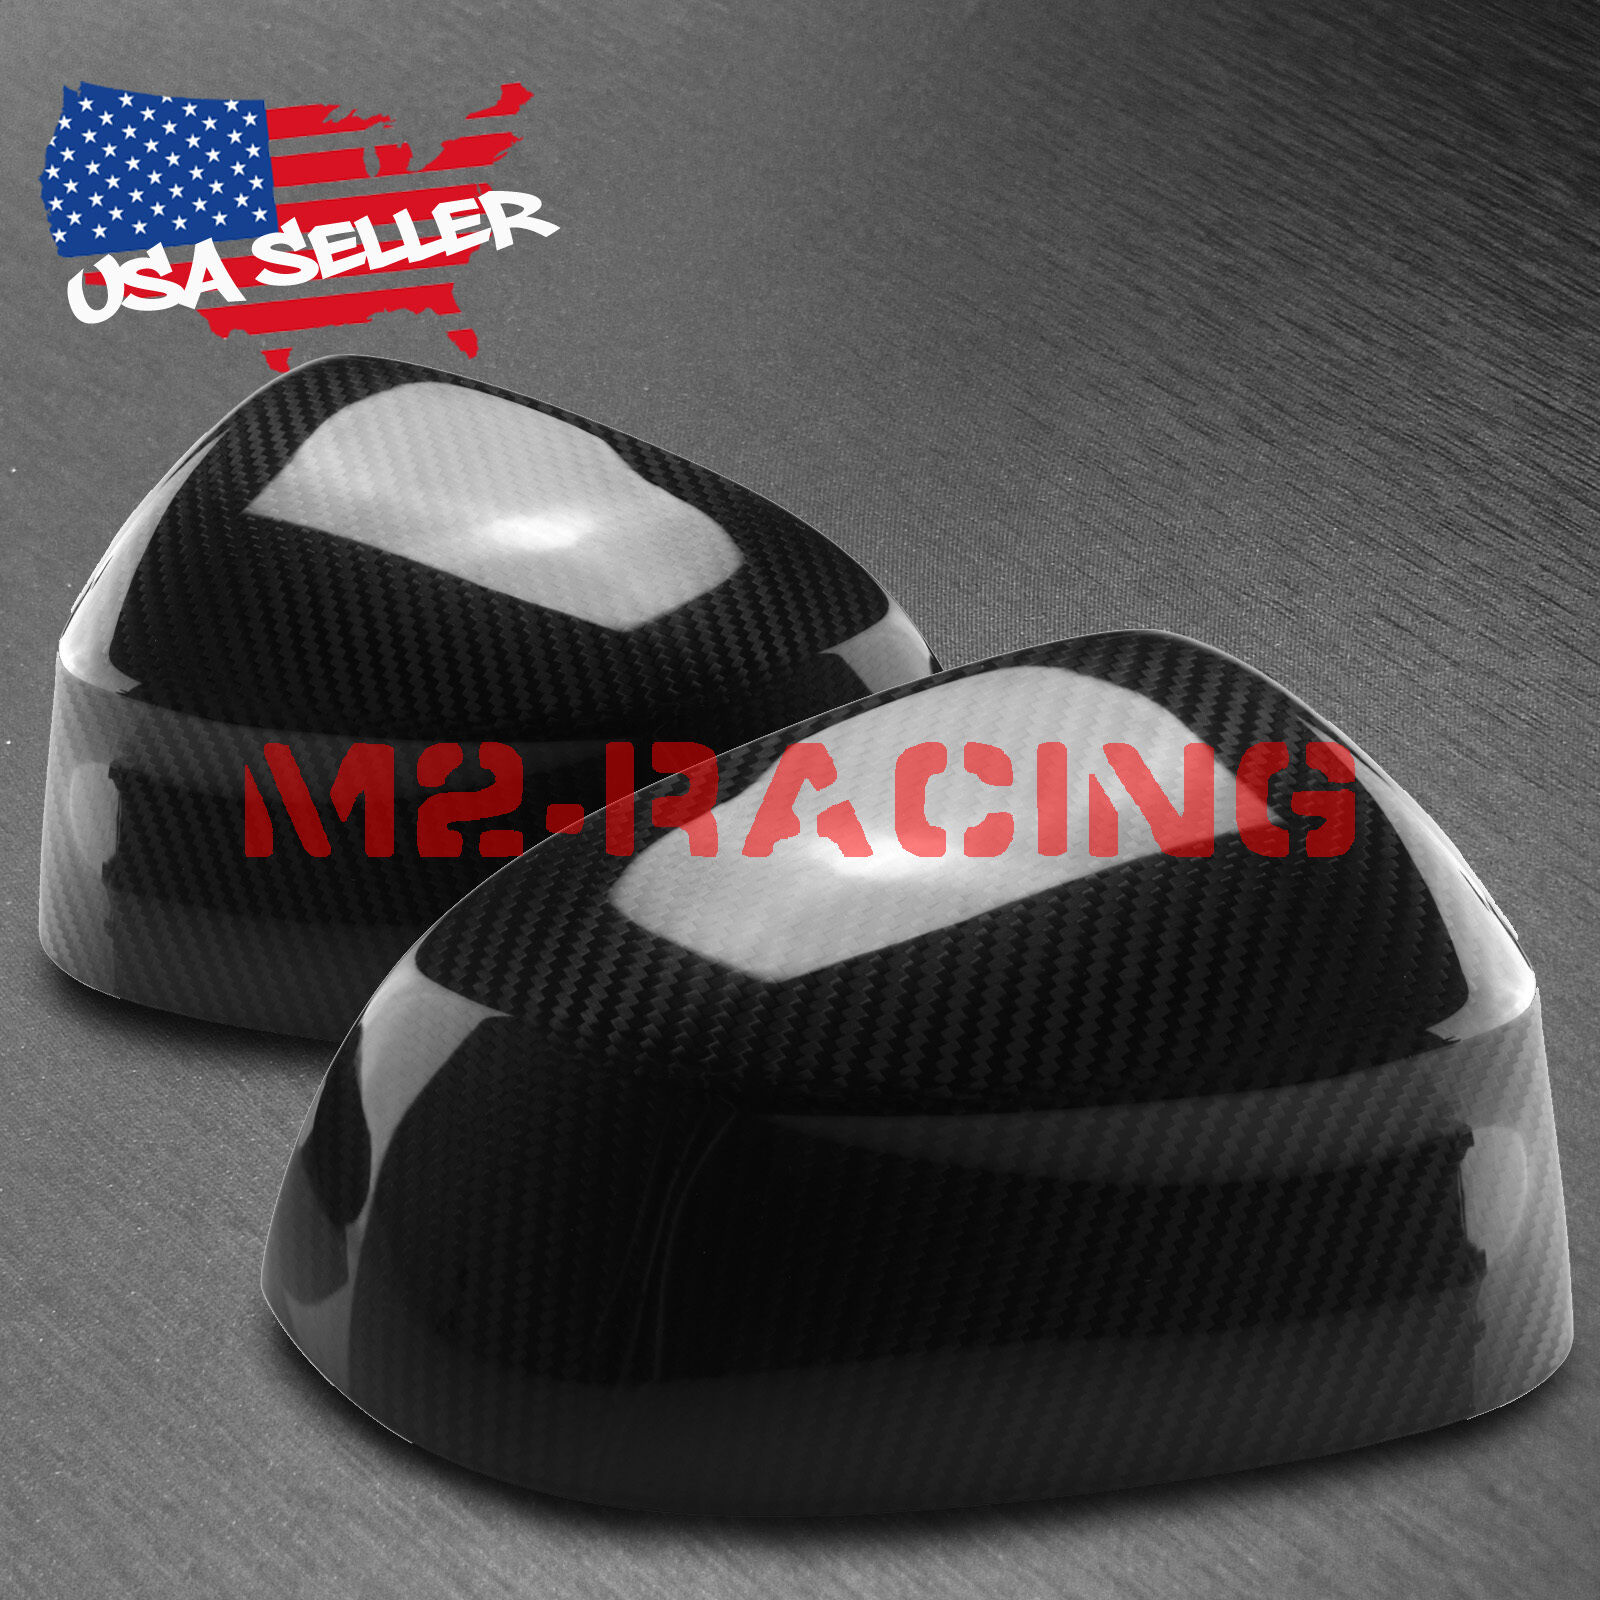 Pair 100% Real Carbon Fiber Side Mirror Covers For 2015 16 BMW x3 E83 x4 F26 x5